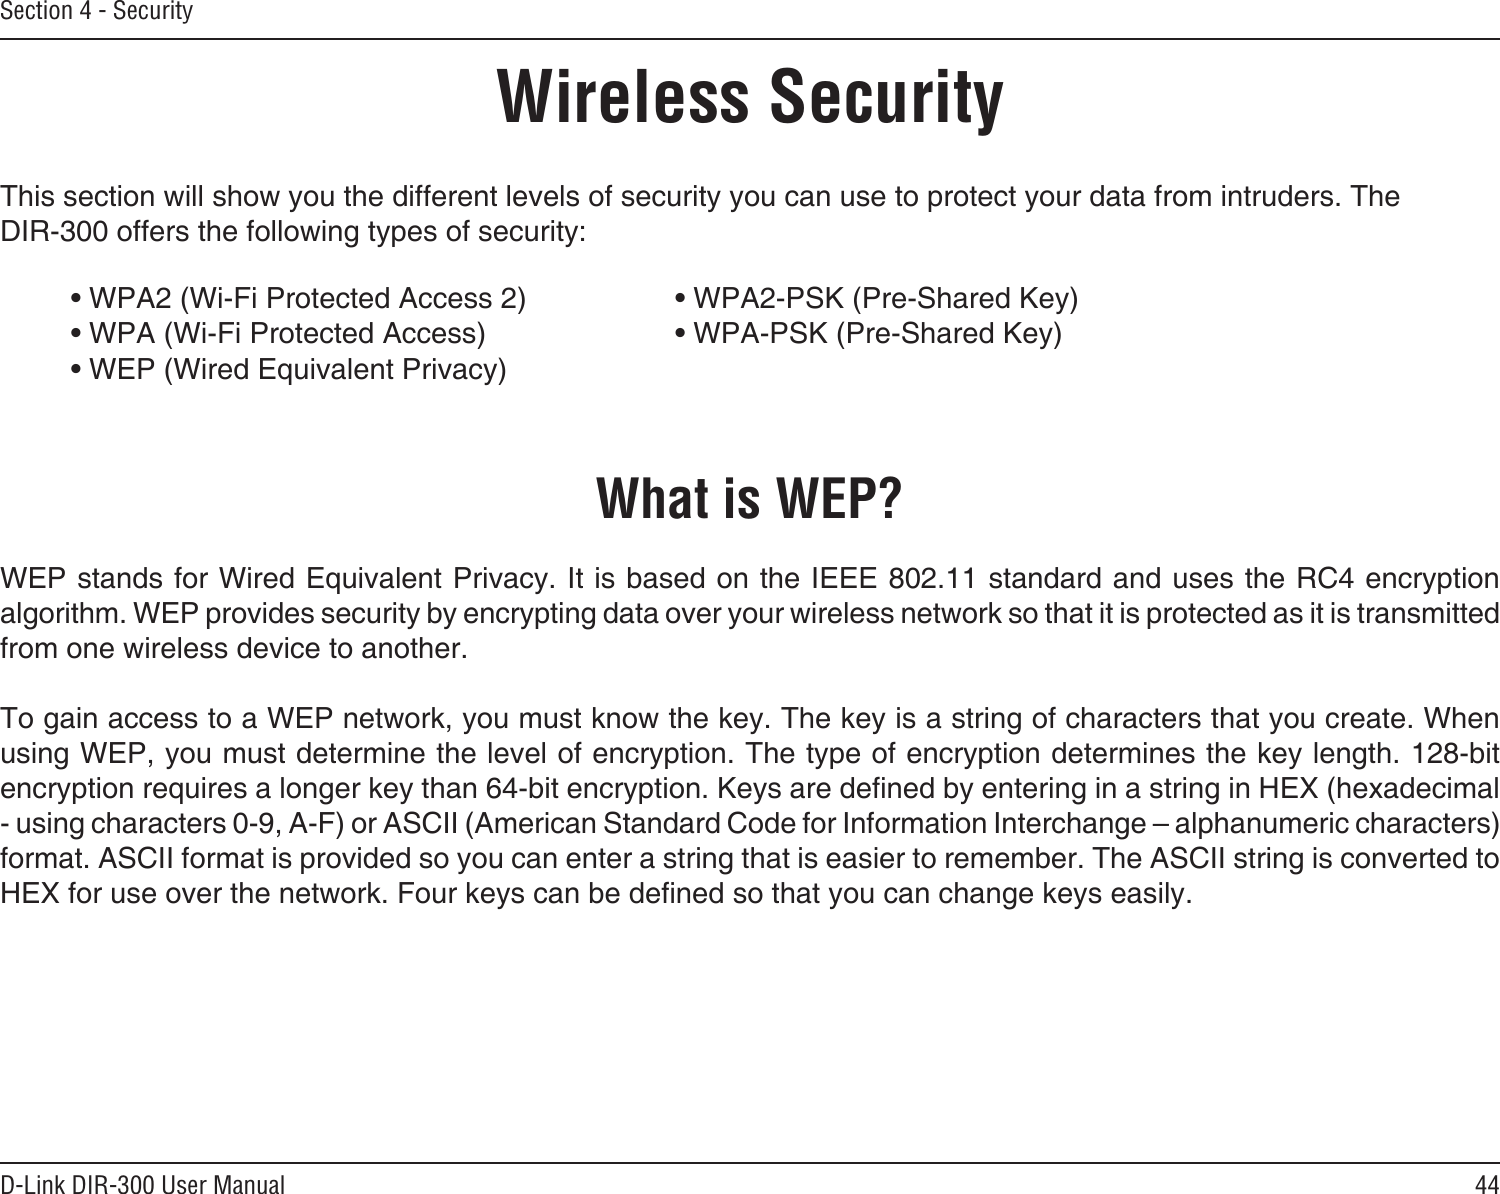 44D-Link DIR-300 User ManualSection 4 - SecurityWireless SecurityThis section will show you the different levels of security you can use to protect your data from intruders. The DIR-300 offers the following types of security:• WPA2 (Wi-Fi Protected Access 2)     • WPA2-PSK (Pre-Shared Key)• WPA (Wi-Fi Protected Access)      • WPA-PSK (Pre-Shared Key)• WEP (Wired Equivalent Privacy)What is WEP?WEP stands for Wired Equivalent Privacy. It is based on the IEEE 802.11 standard and uses the RC4 encryption algorithm. WEP provides security by encrypting data over your wireless network so that it is protected as it is transmitted from one wireless device to another.To gain access to a WEP network, you must know the key. The key is a string of characters that you create. When using WEP, you must determine the level of encryption. The type of encryption determines the key length. 128-bit encryption requires a longer key than 64-bit encryption. Keys are dened by entering in a string in HEX (hexadecimal - using characters 0-9, A-F) or ASCII (American Standard Code for Information Interchange – alphanumeric characters) format. ASCII format is provided so you can enter a string that is easier to remember. The ASCII string is converted to HEX for use over the network. Four keys can be dened so that you can change keys easily.